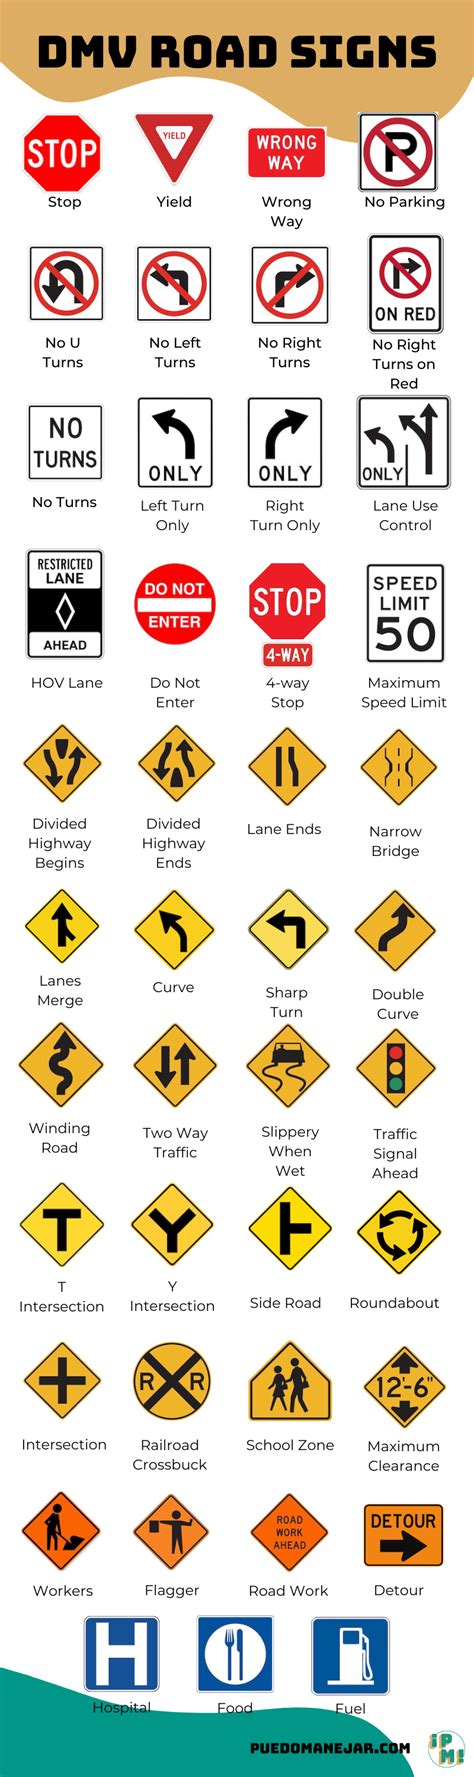 Street signs dmv test. We also offer a variety of free road sign DMV practice permit test quizzes, all of which are suitable for the 2024 permit test. Read more. Regulatory signs. 1 Stop. 2 Four Way Stop. 3 Stop Except Right Turn. 4 Stop Here on Red. 5 Wrong Way. 6 Speed Limit. 7 Yield. 8 Yield to Oncoming Traffic. 9 Divided Highway. 10 Do Not Enter. 